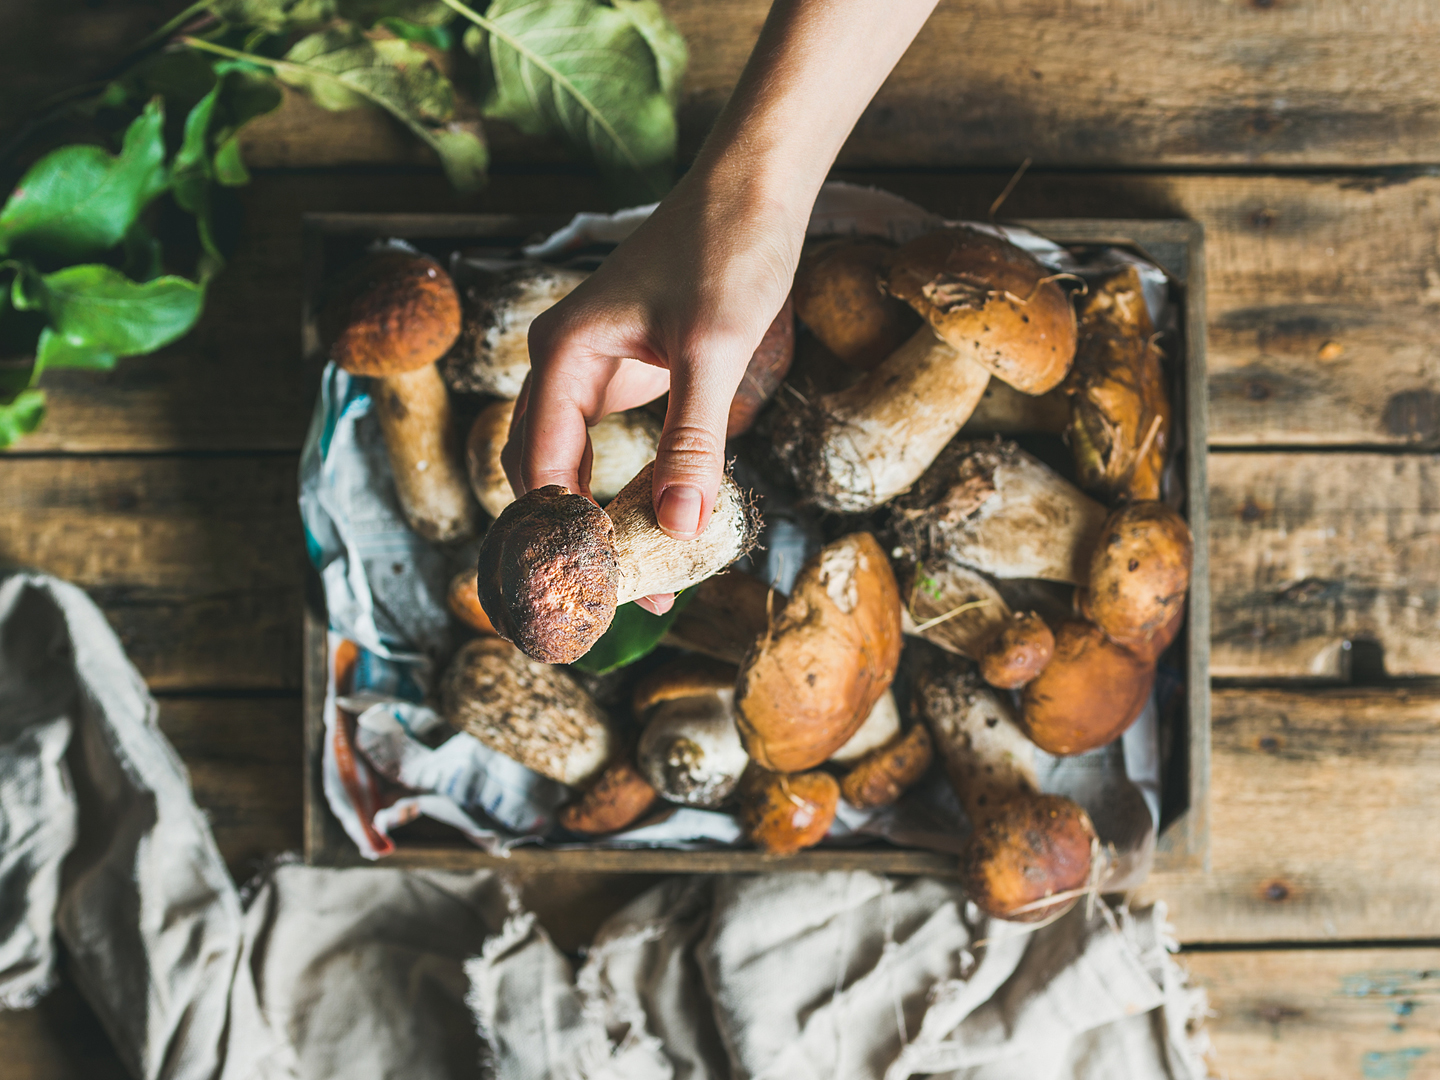 Reheating Mushrooms? | Food Safety | Andrew Weil, M.D.